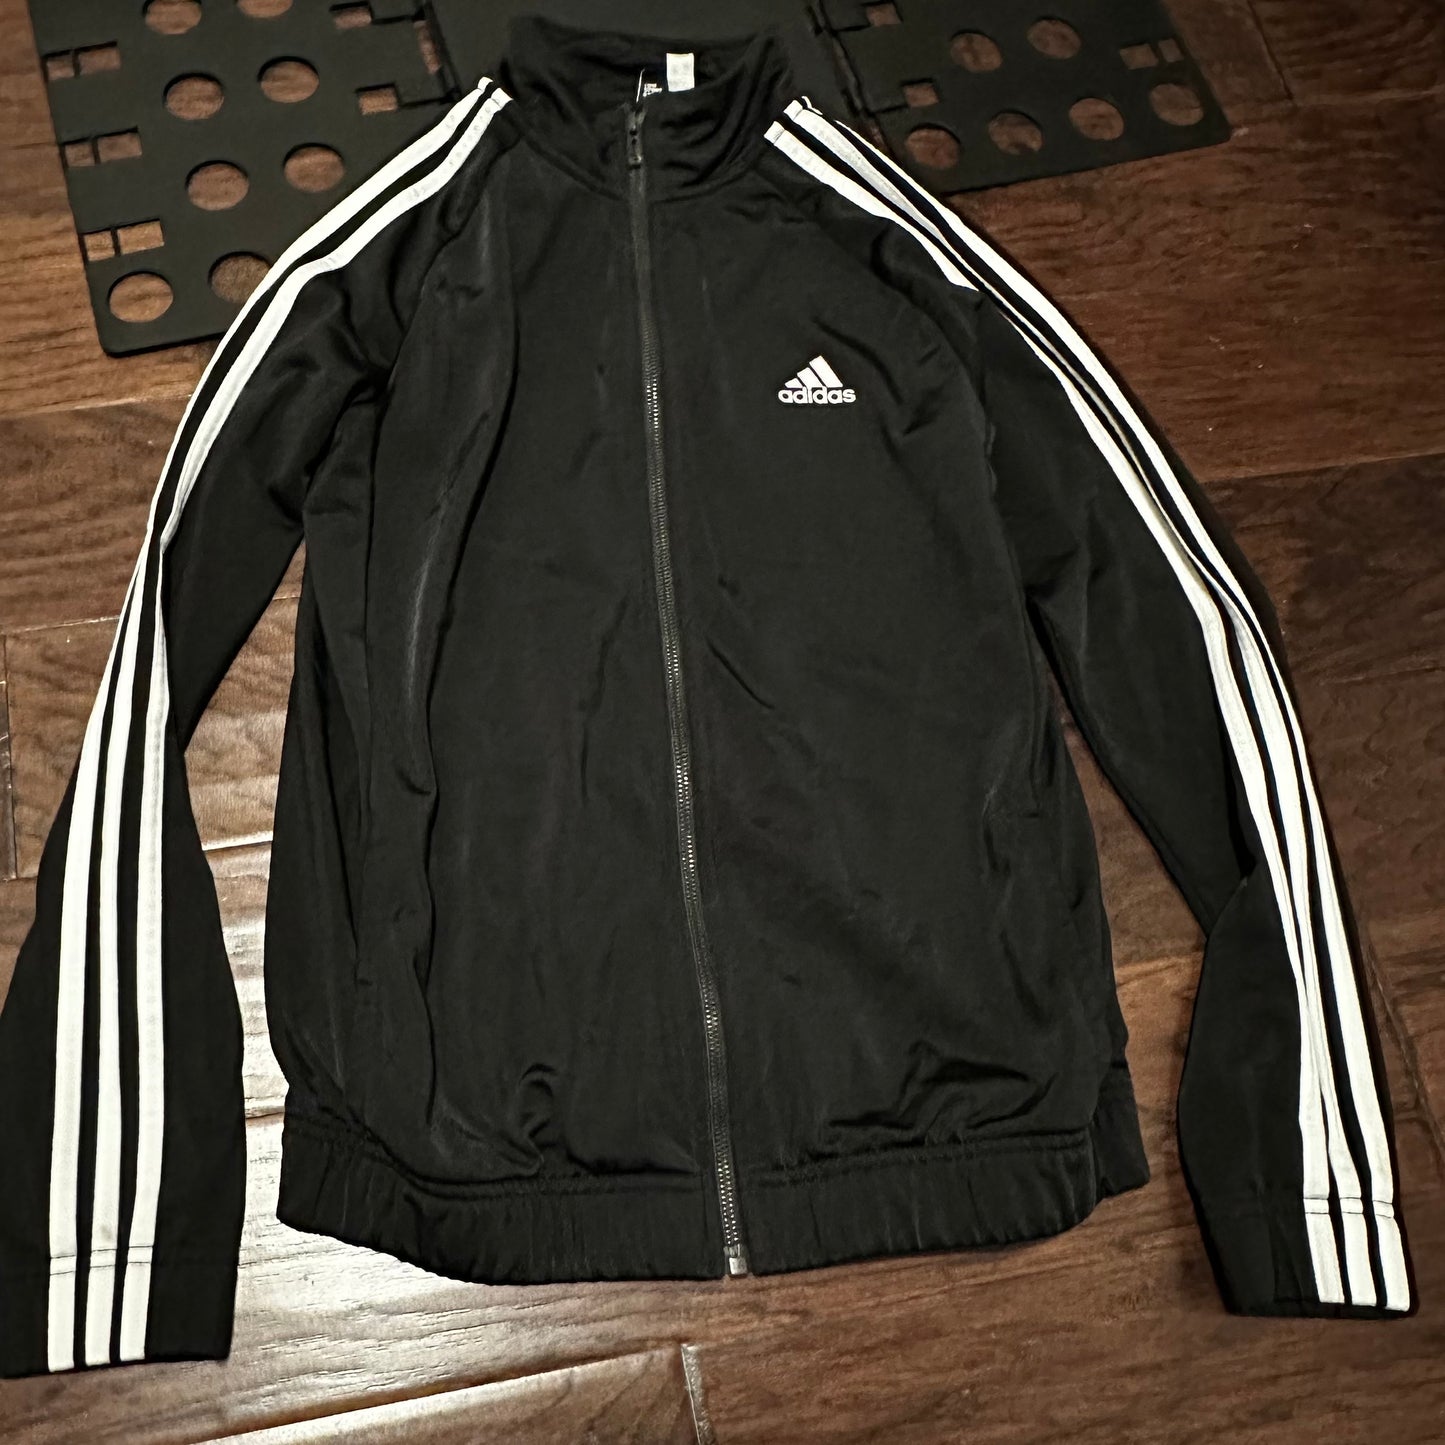 Adidas Tricot Track Top, Stripes Track Jacket